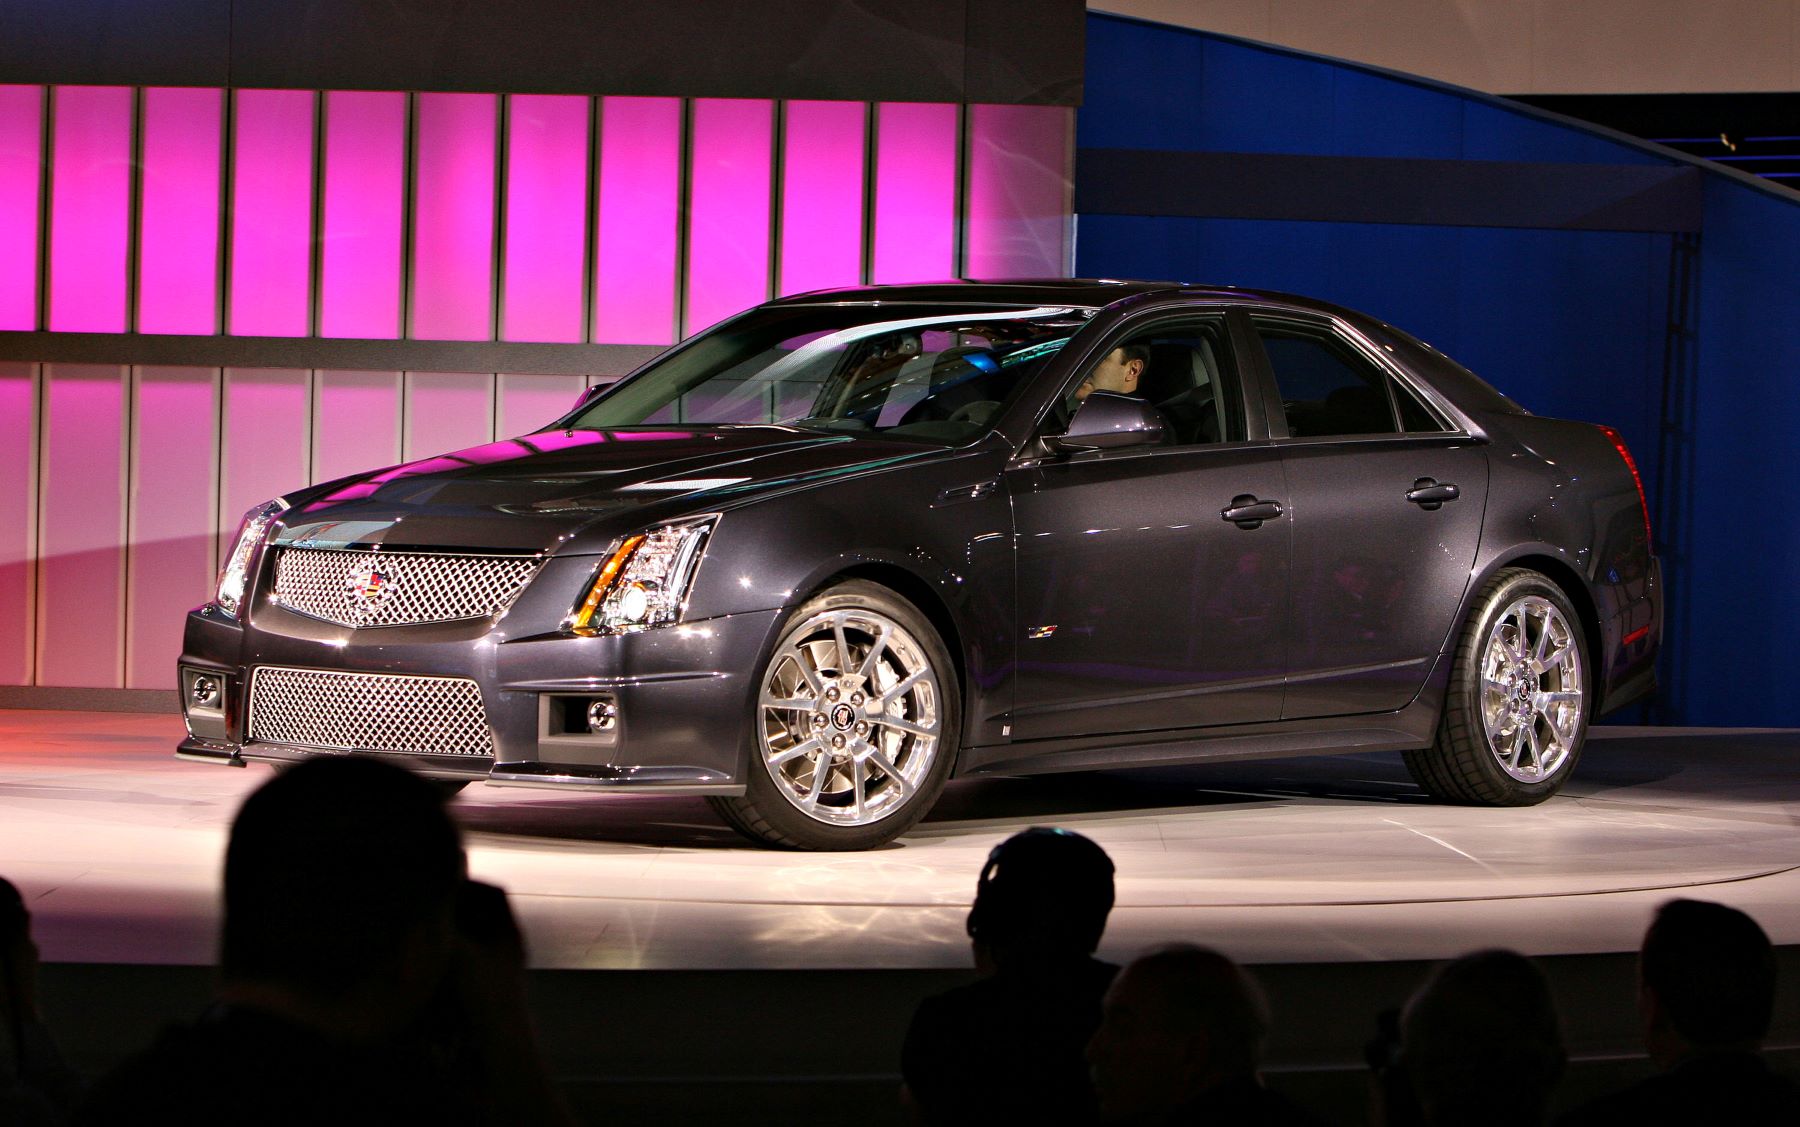 A 2009 Cadillac CTS-V luxury sedan driven on stage at the 2008 North American International Auto Show